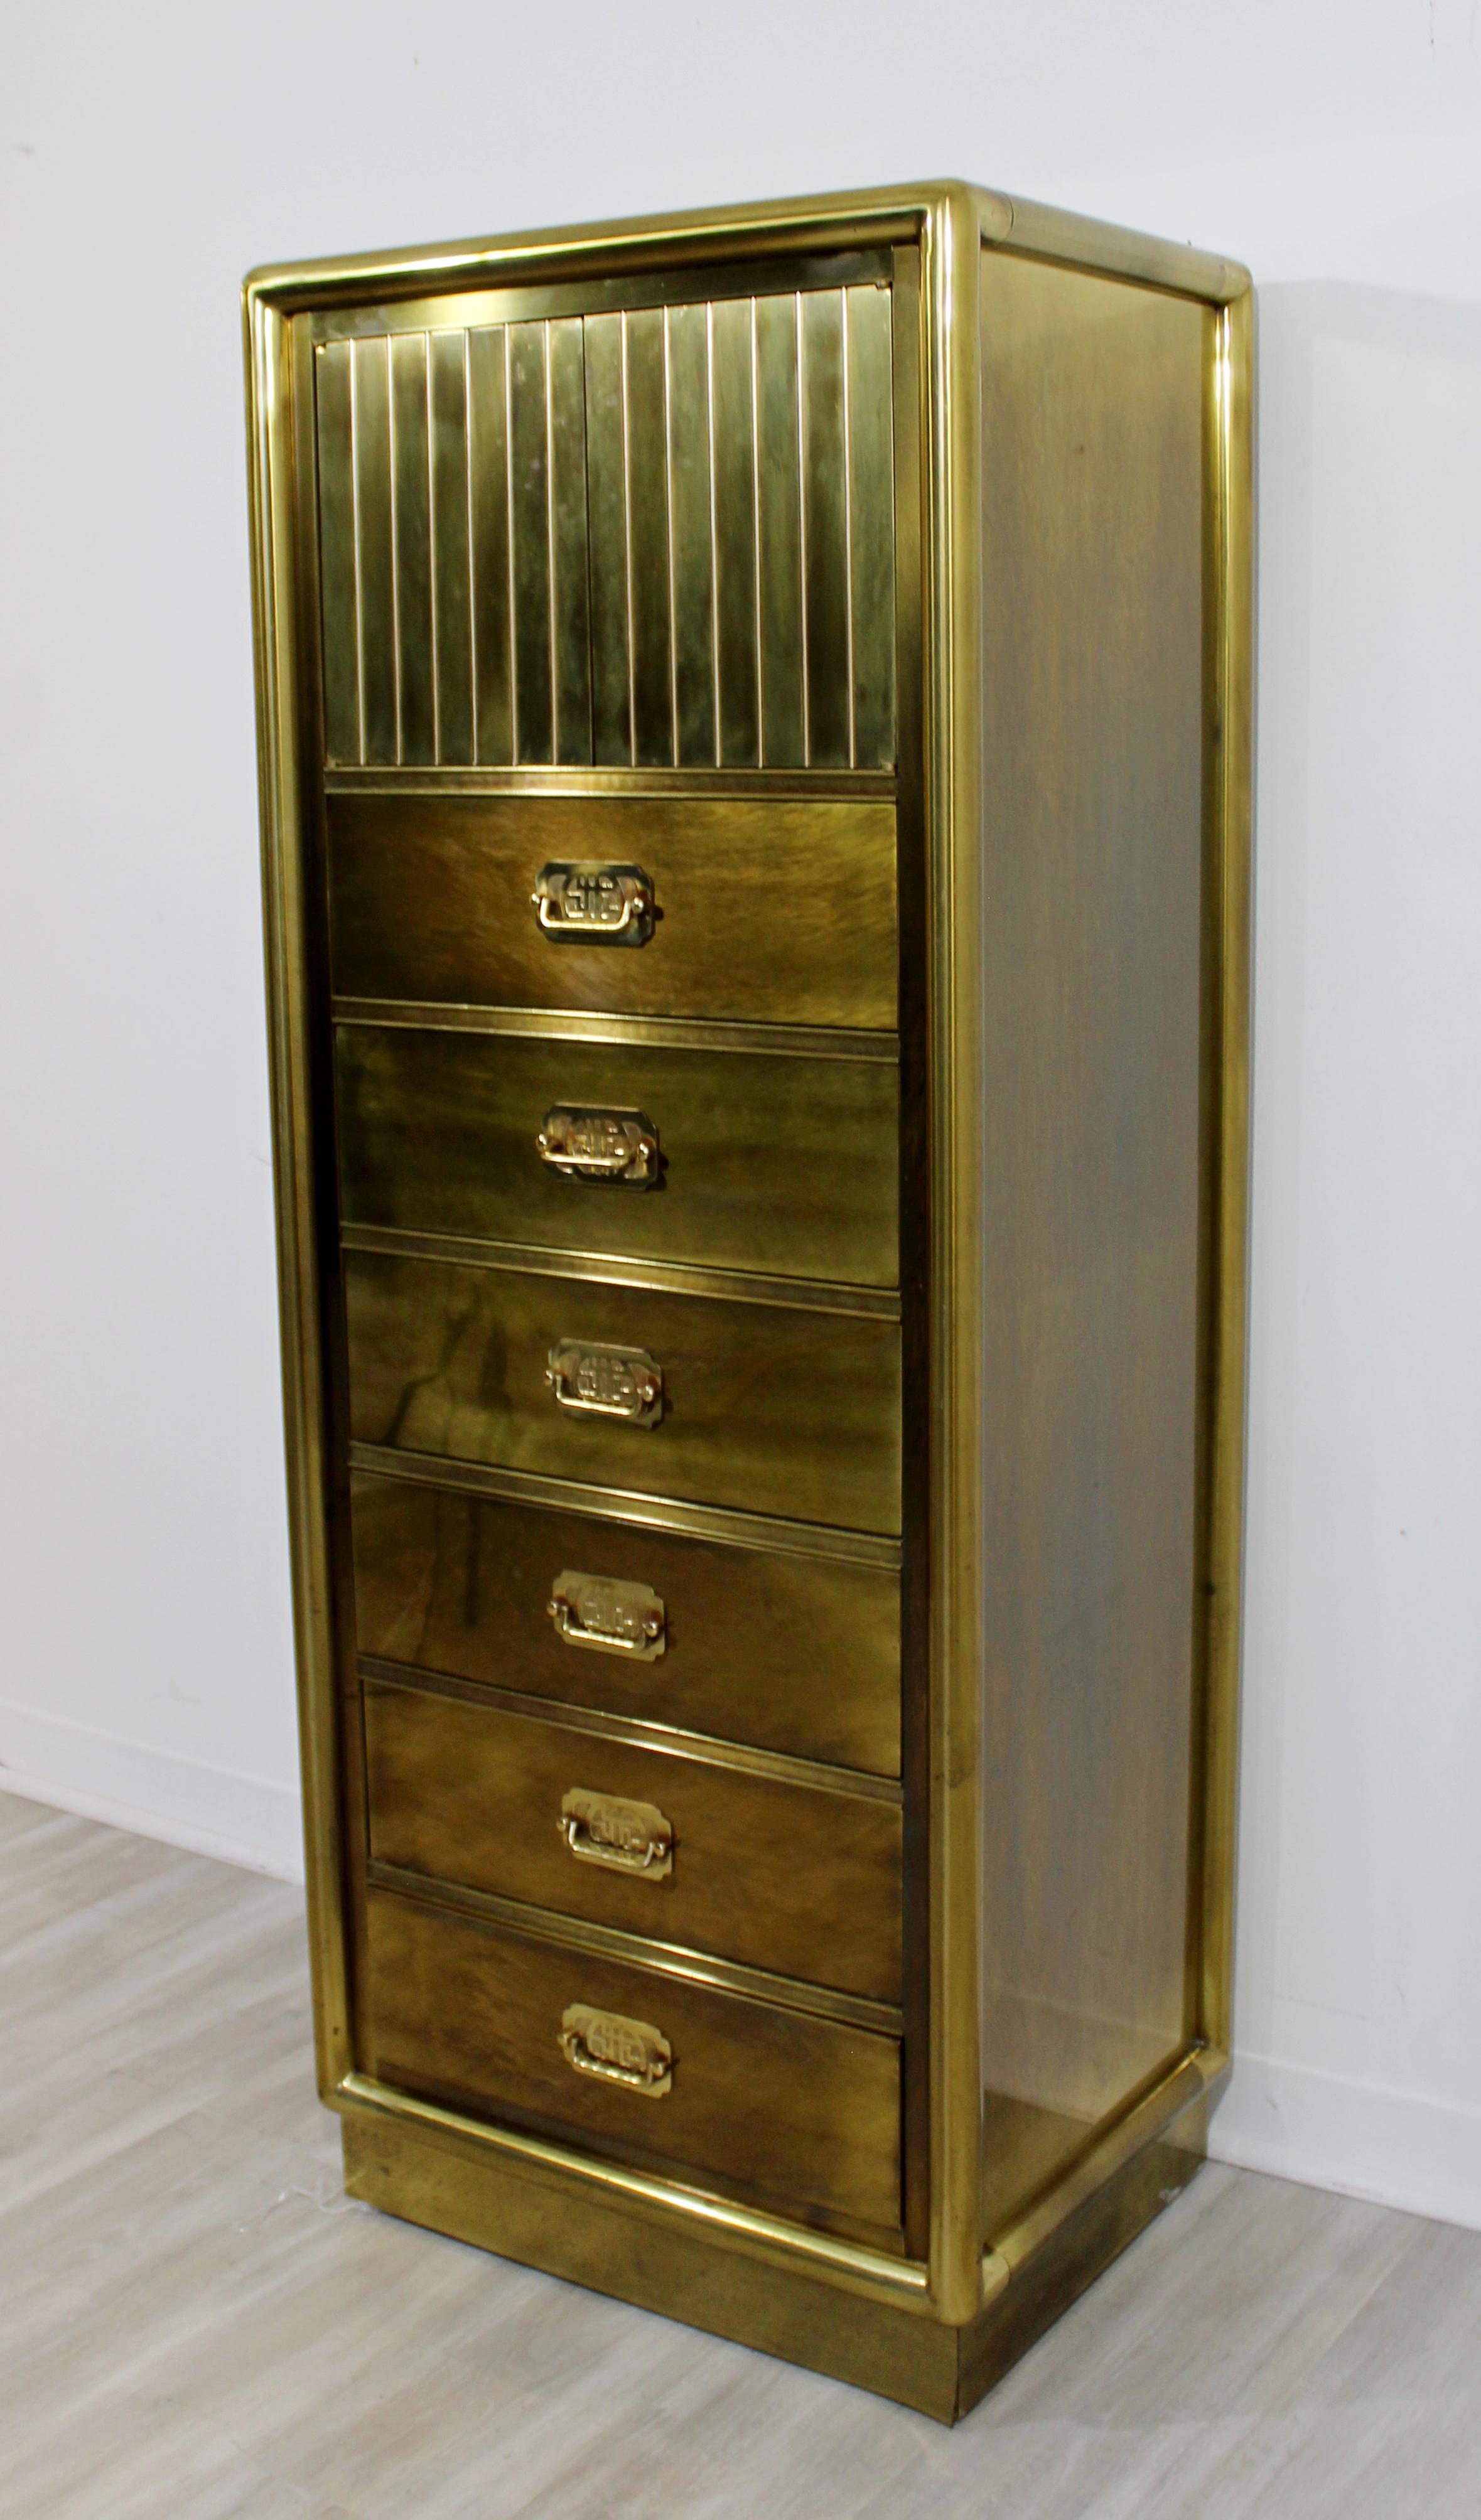 American Mid-Century Modern Mastercraft Etched Acid Brass Lingerie Cabinet, 1970s